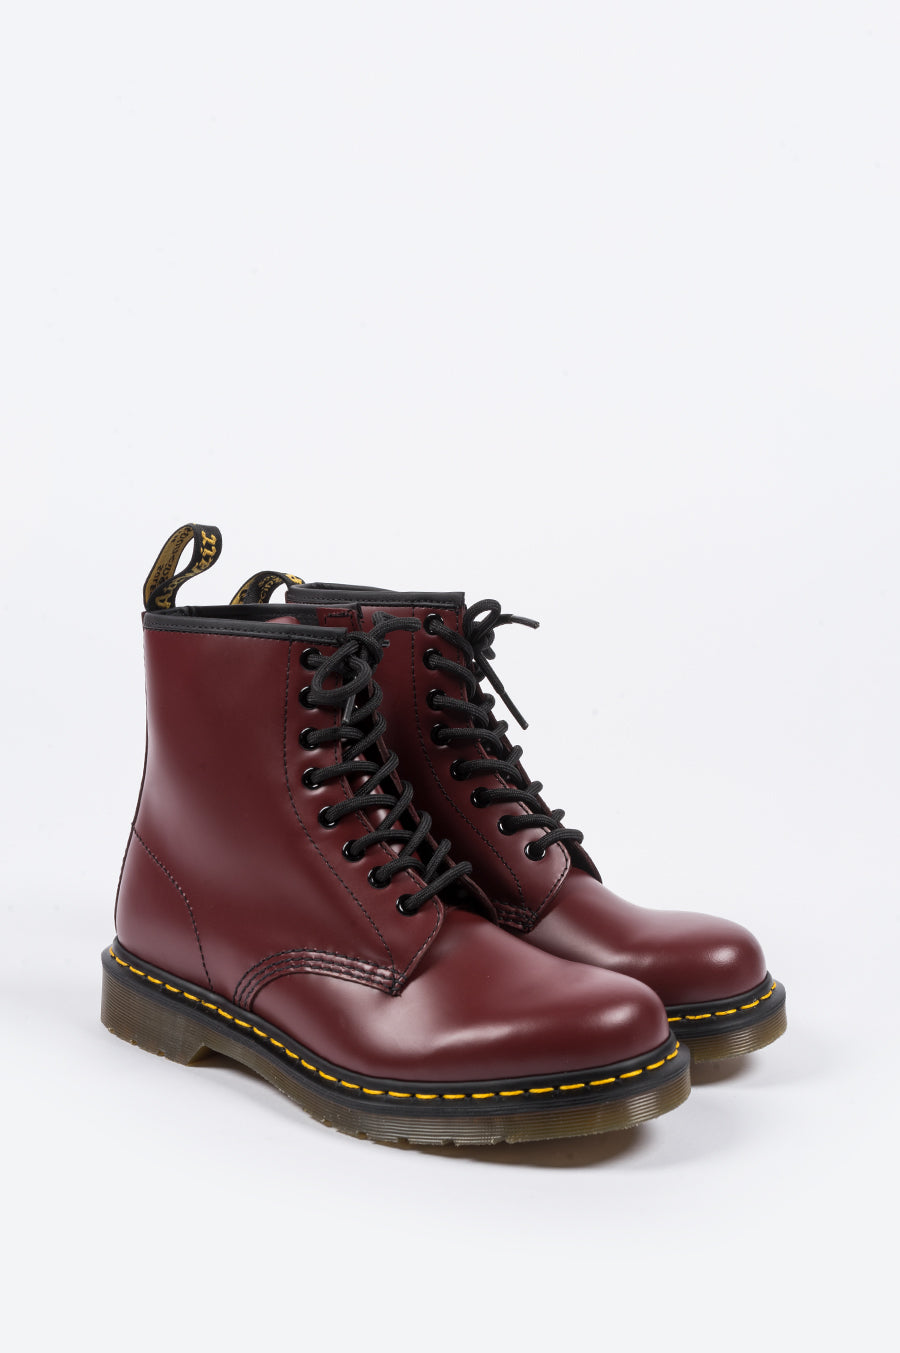 DR MARTENS 1460 SMOOTH CHERRY RED - BLENDS